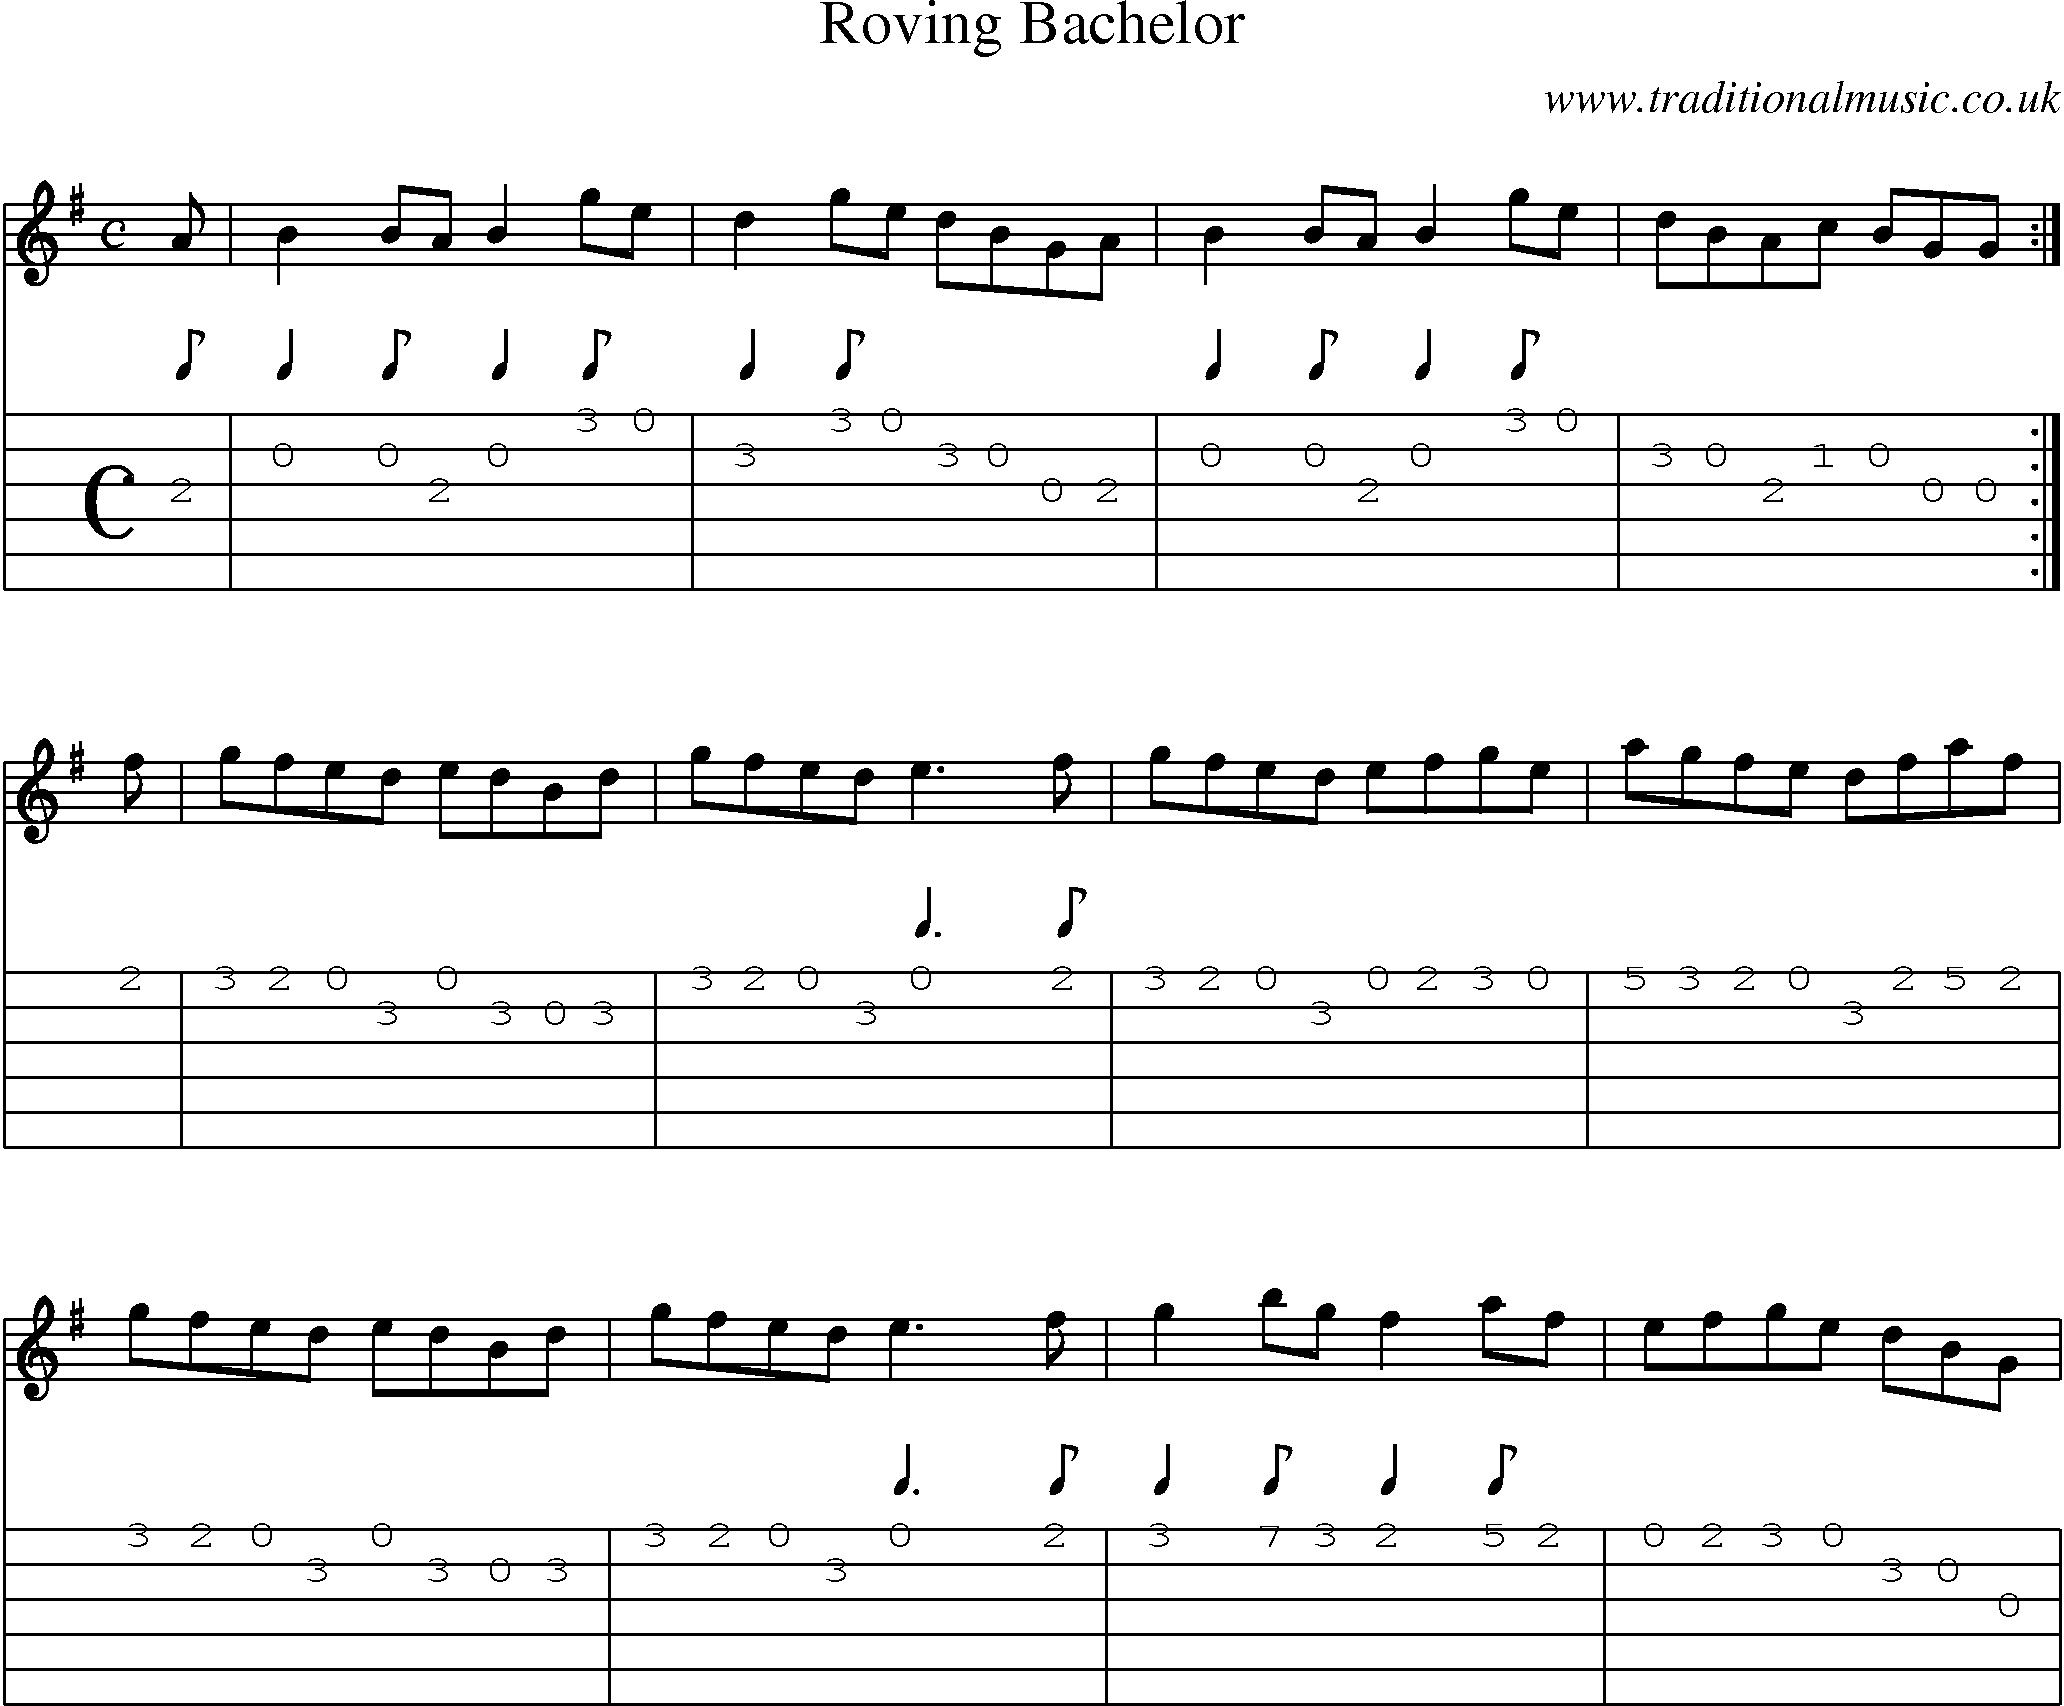 Music Score and Guitar Tabs for Roving Bachelor